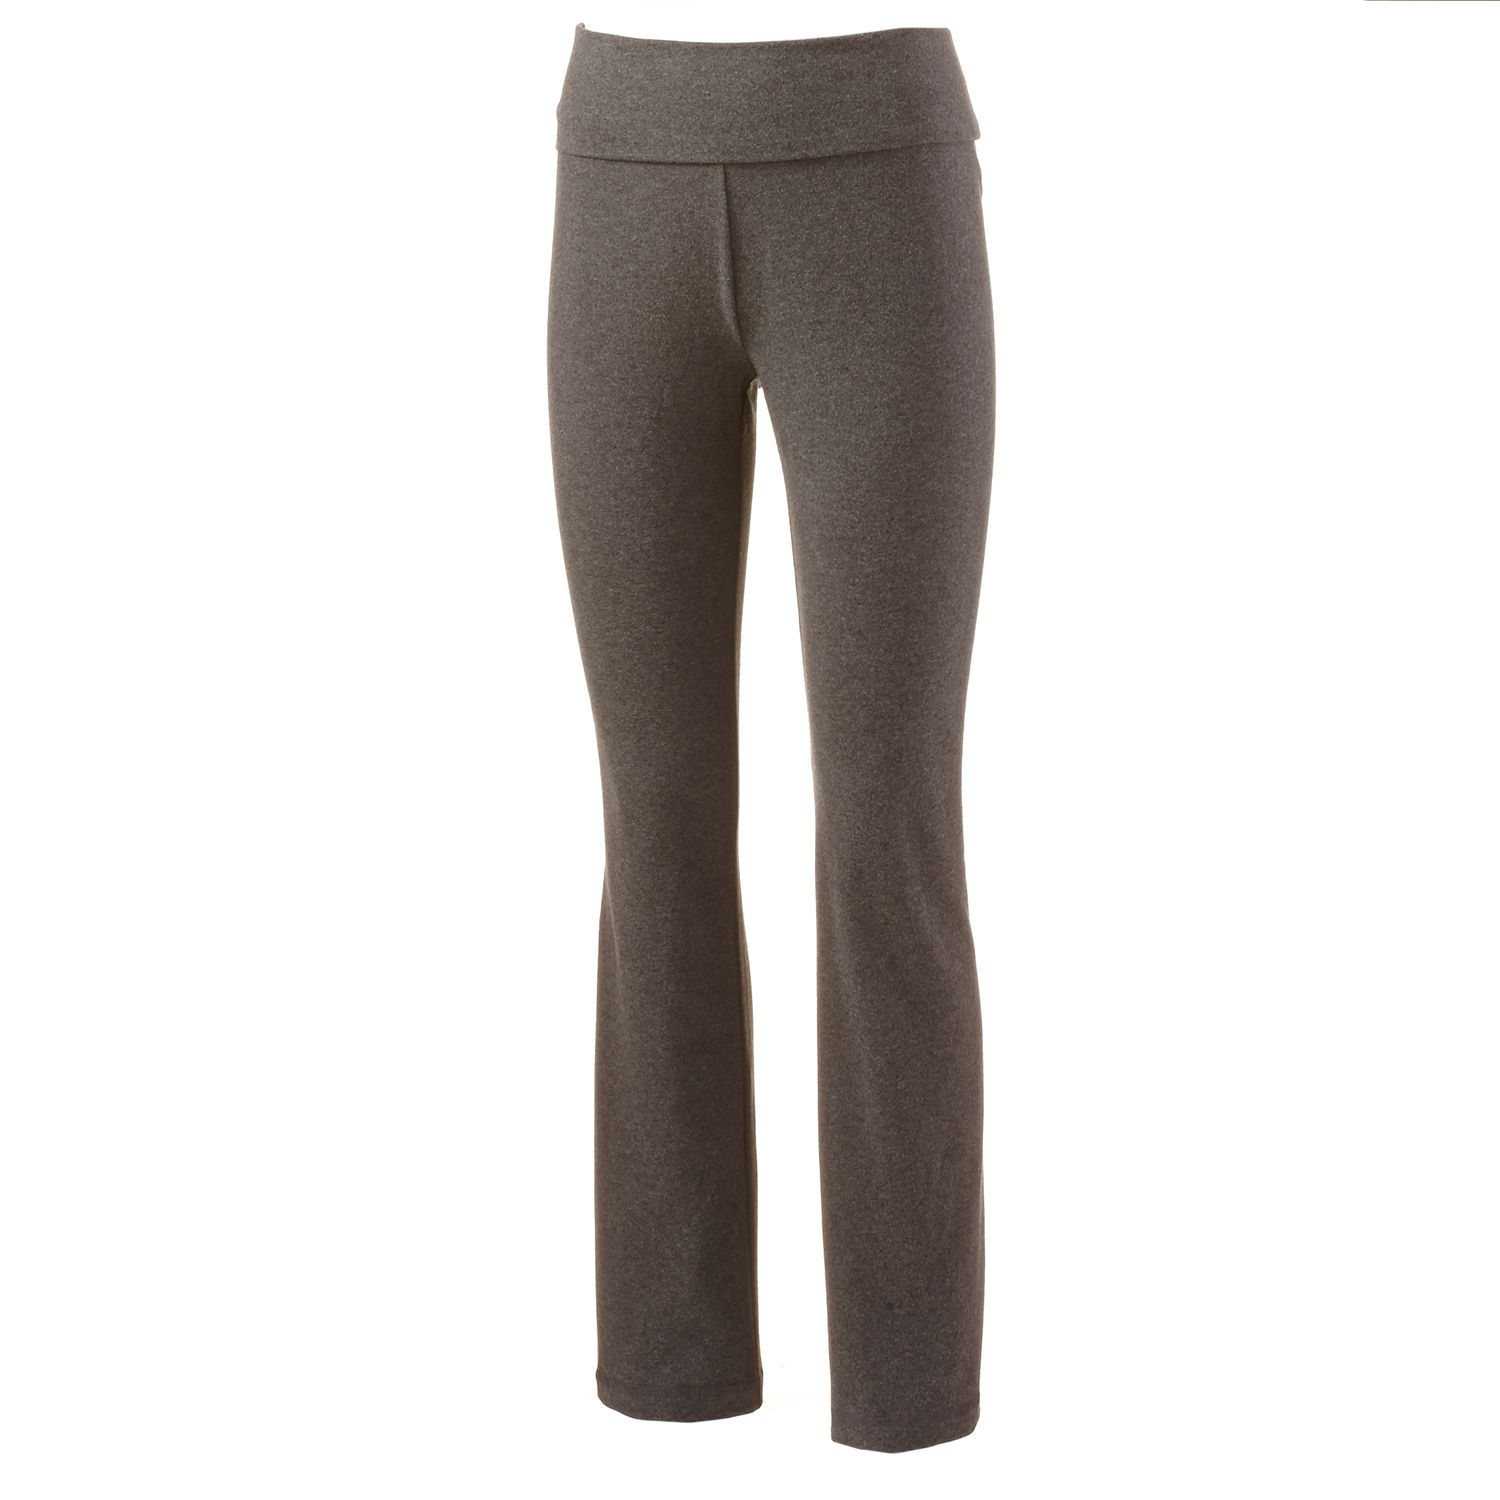 tek gear fit and flare yoga pants